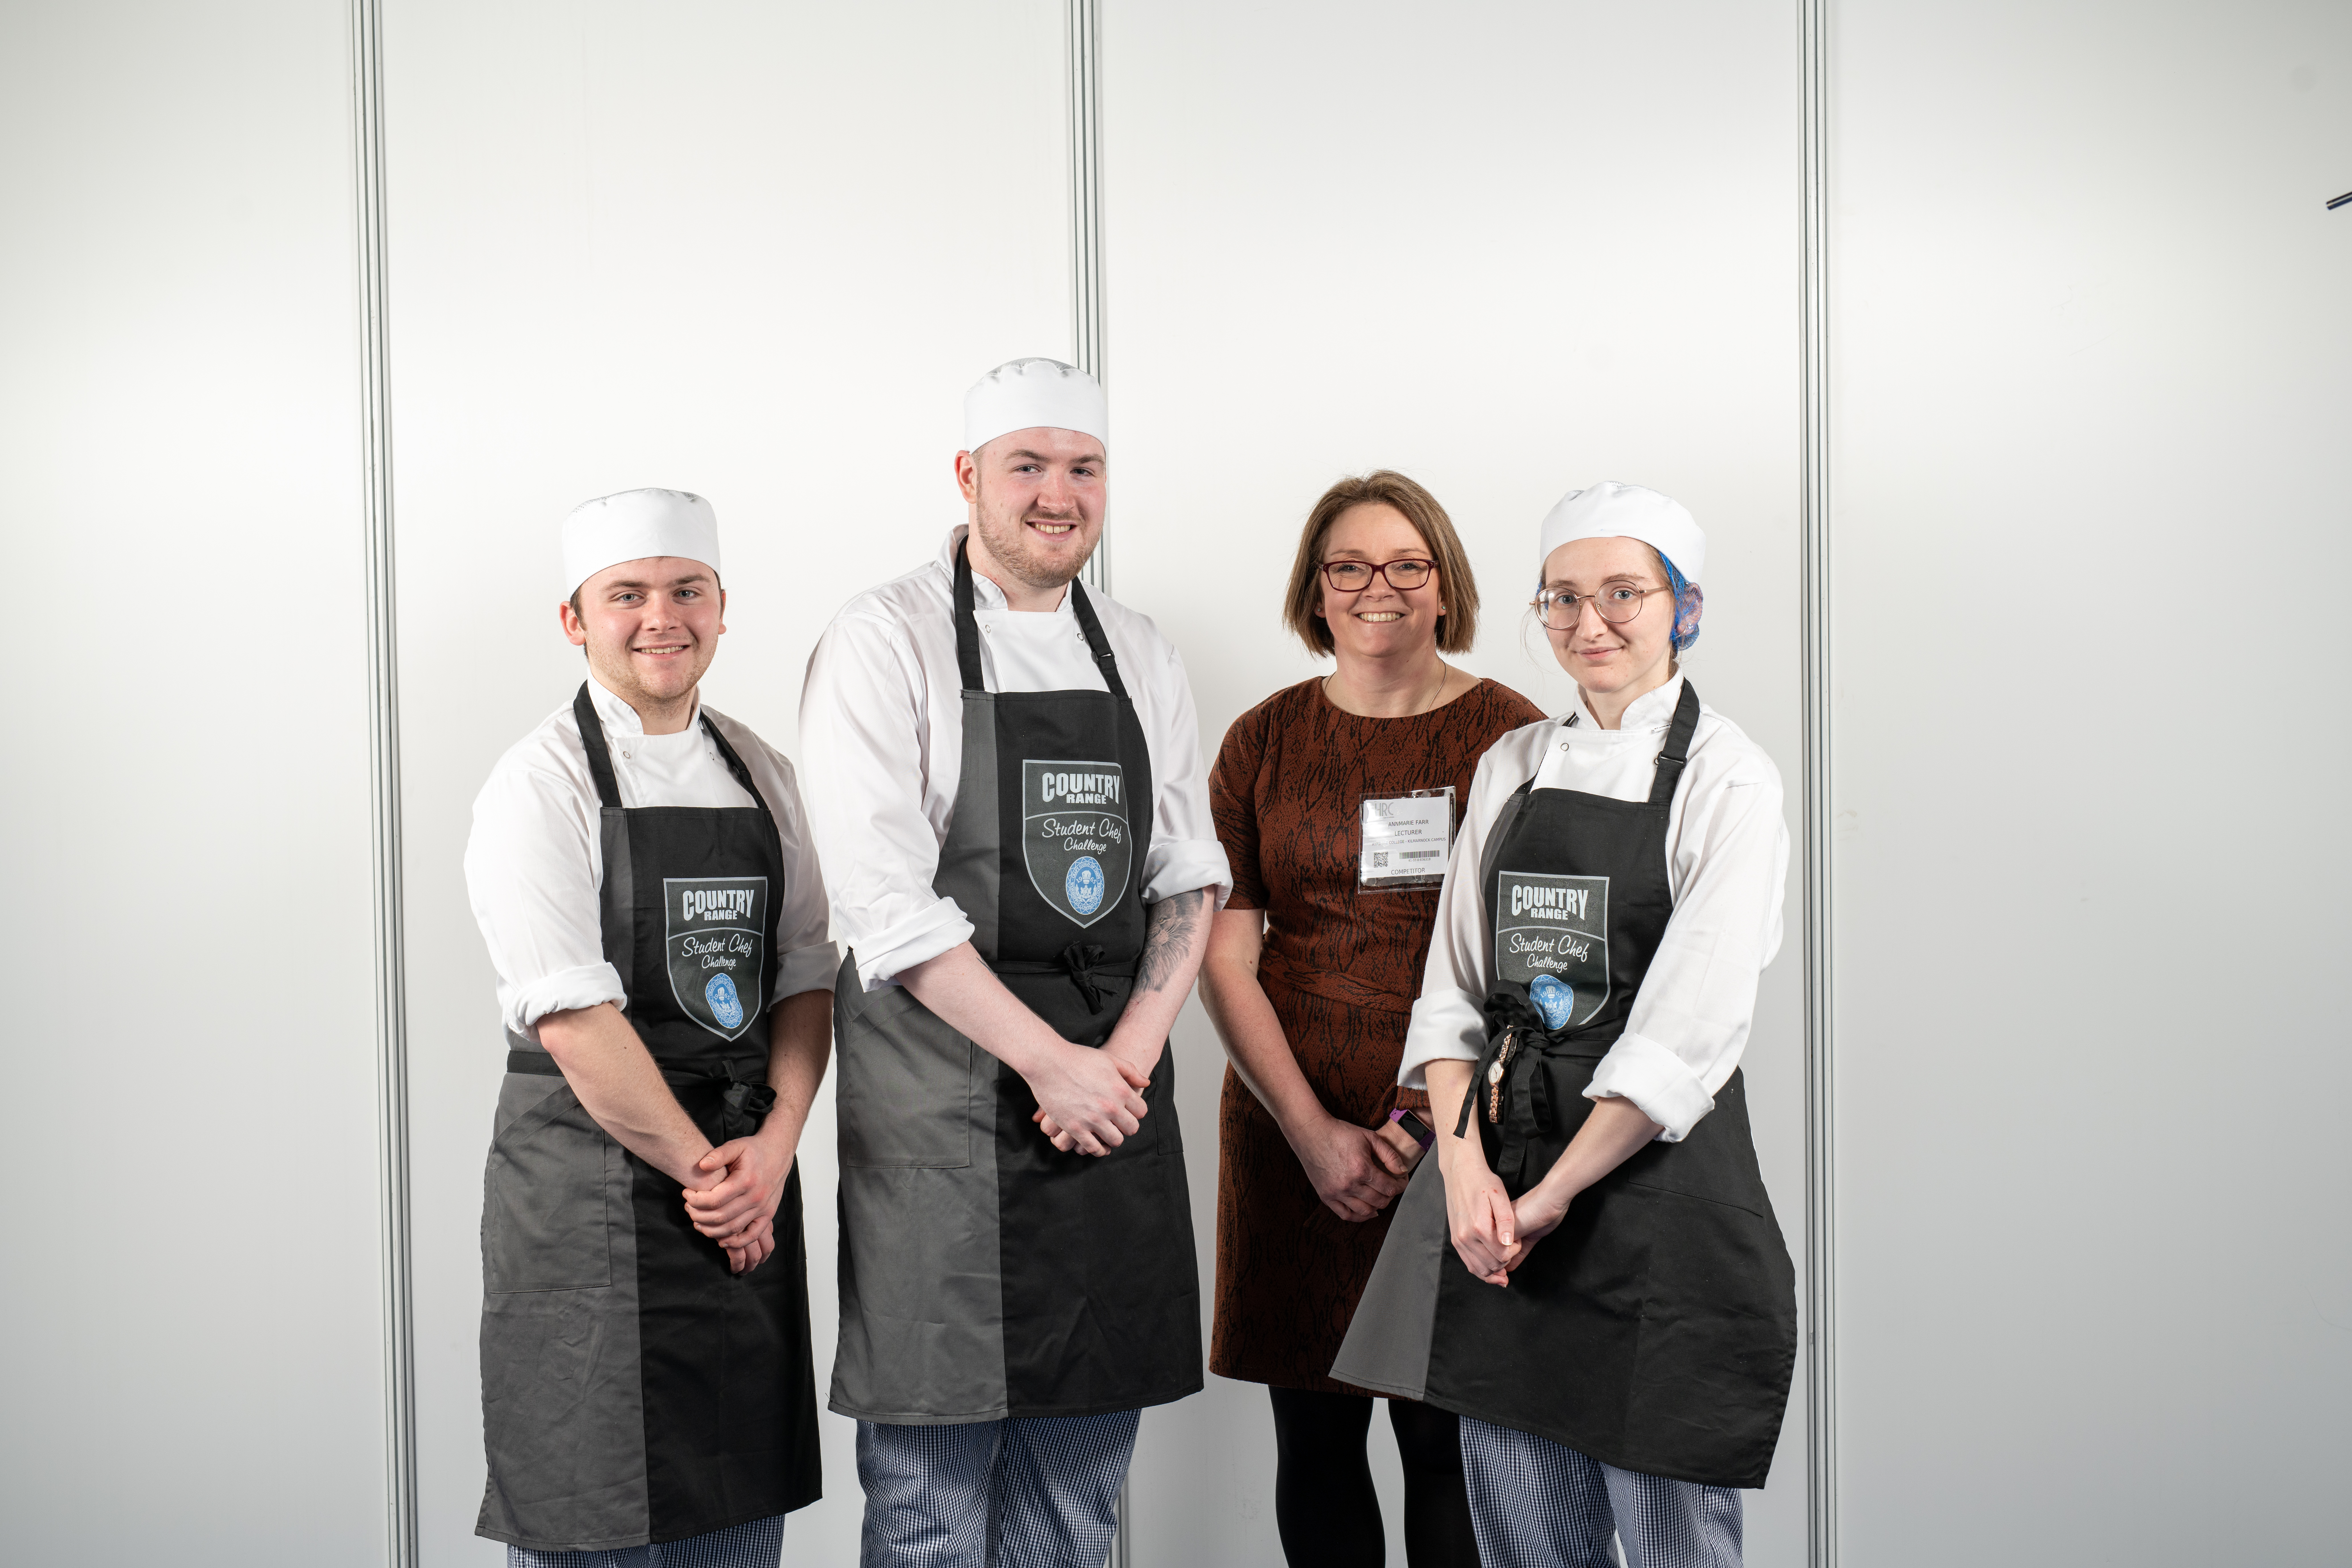 Professional Cookery students reach national cooking competition finals